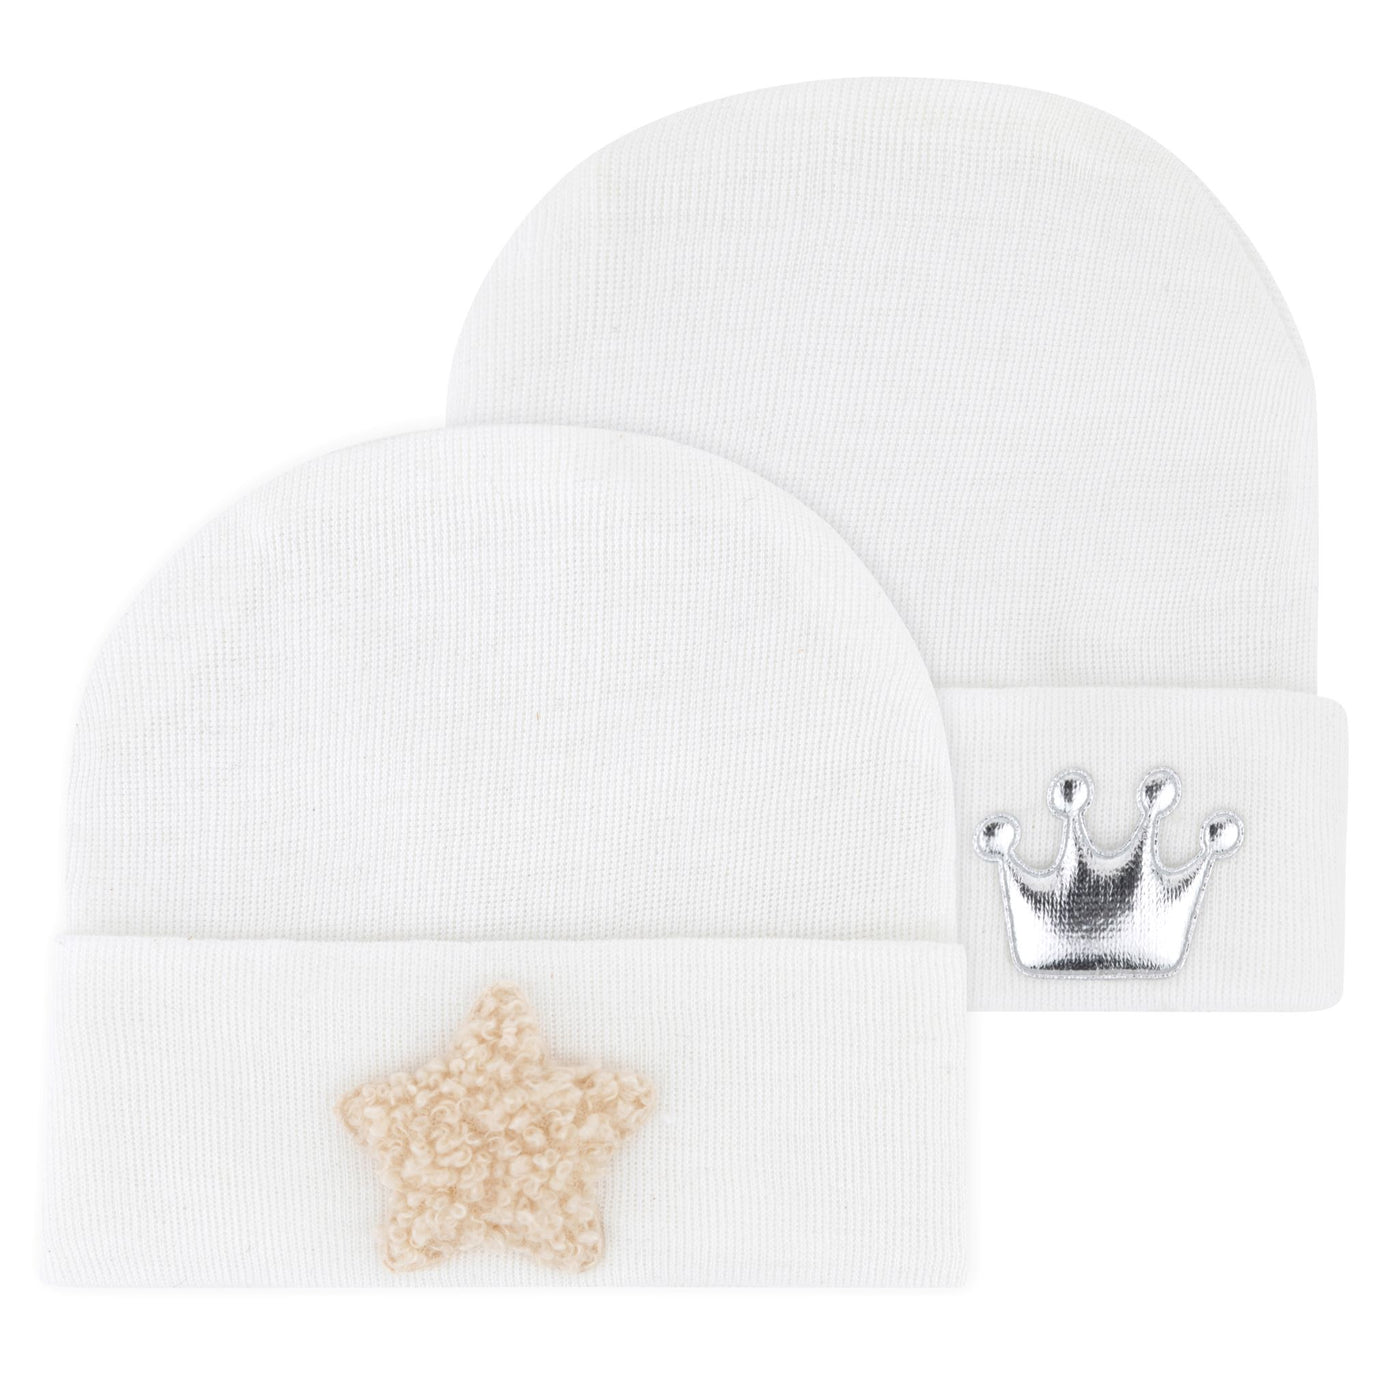 Ely's & Co. Hospital Hats Two Pack White